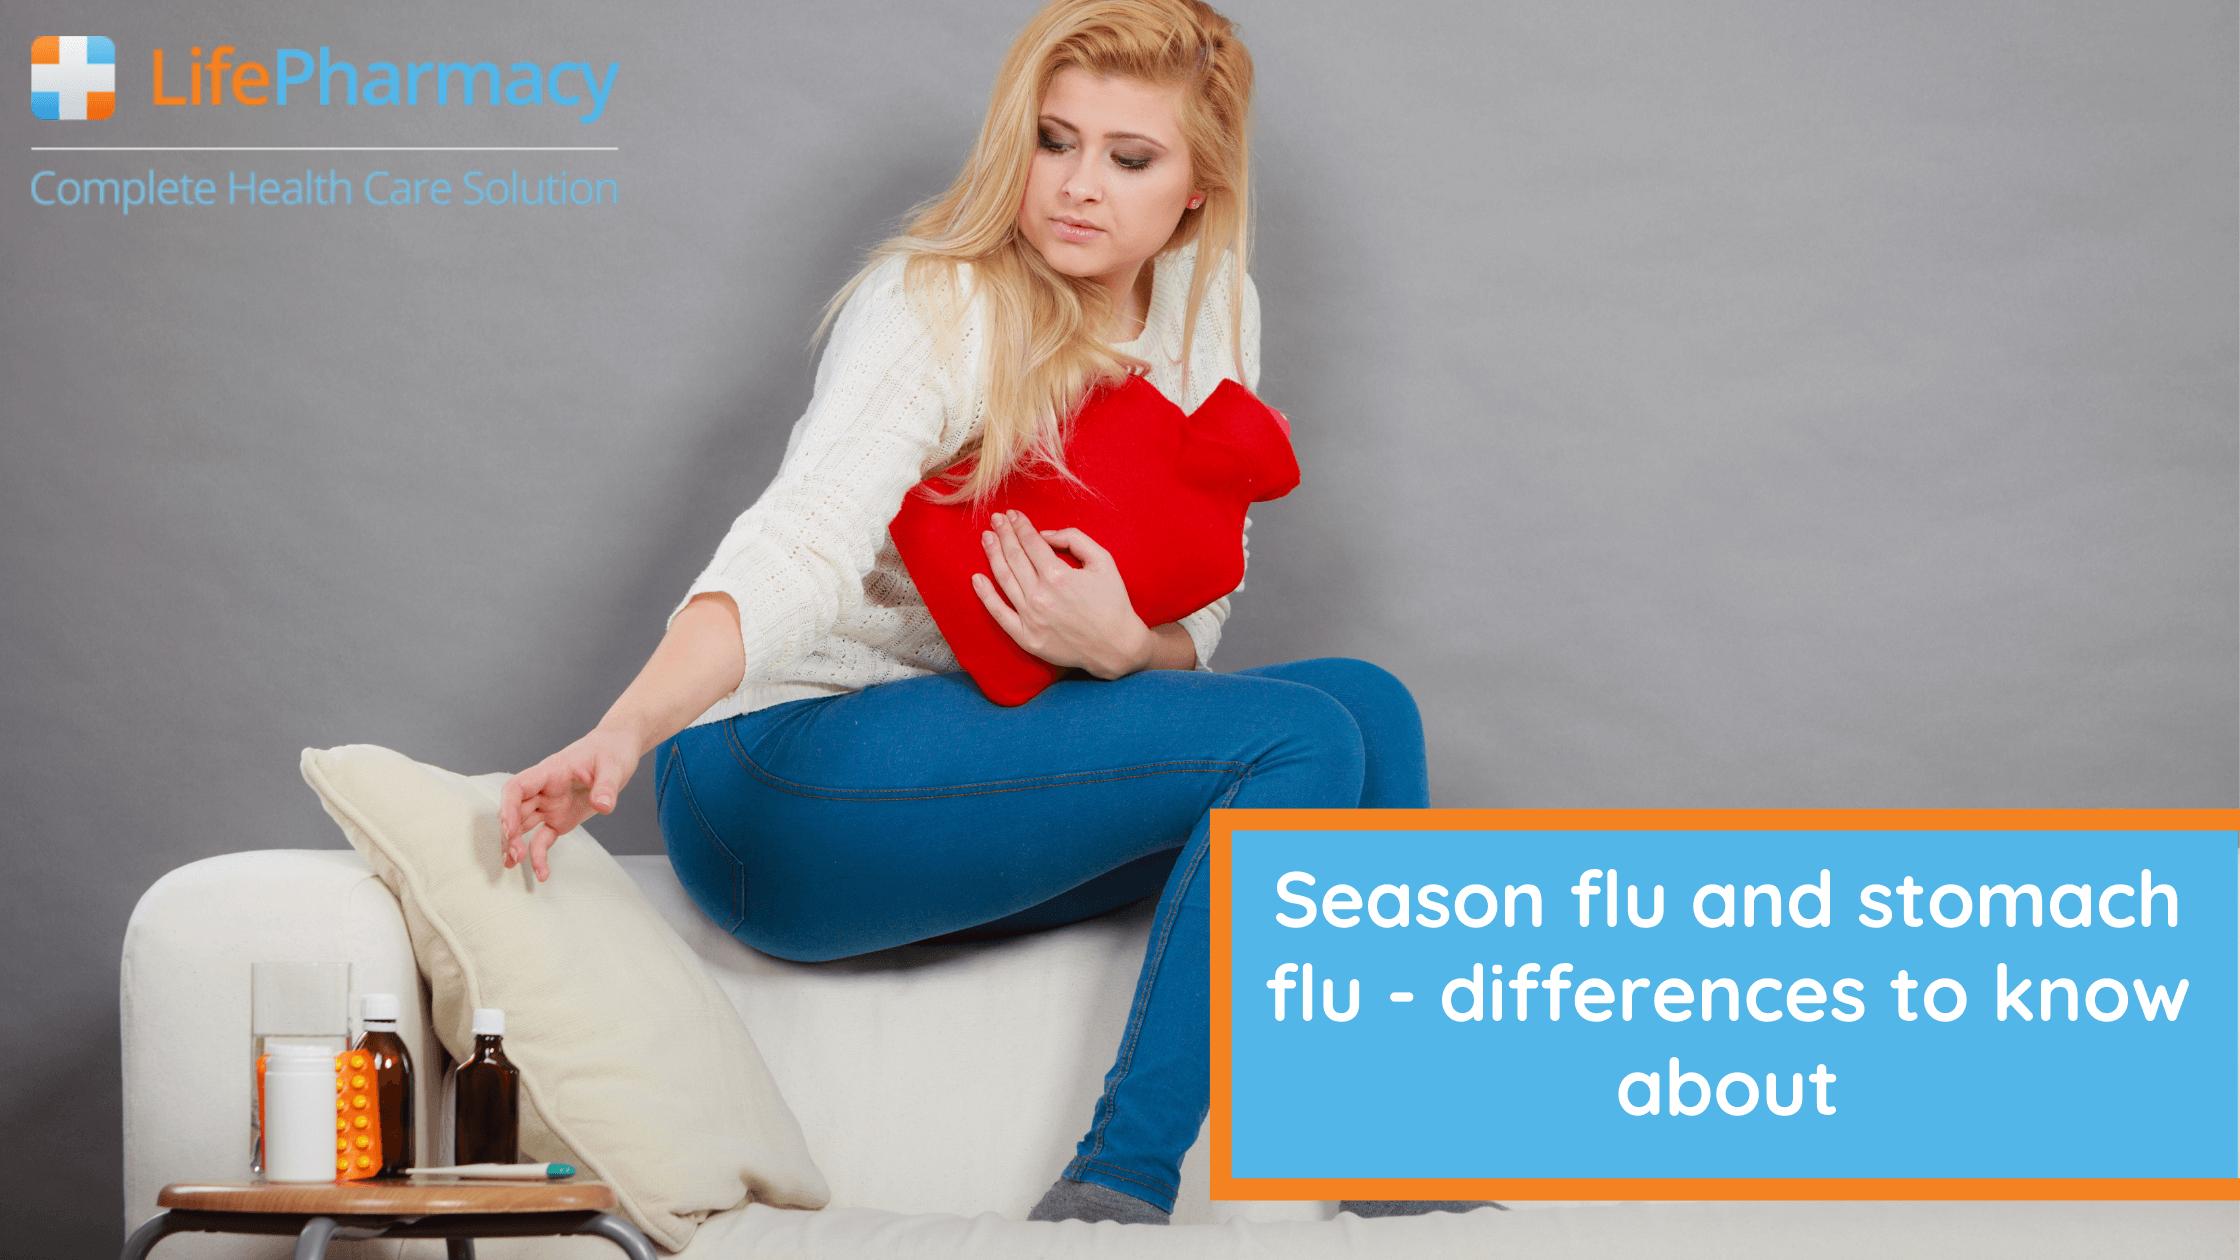  Season flu and stomach flu - differences to know about